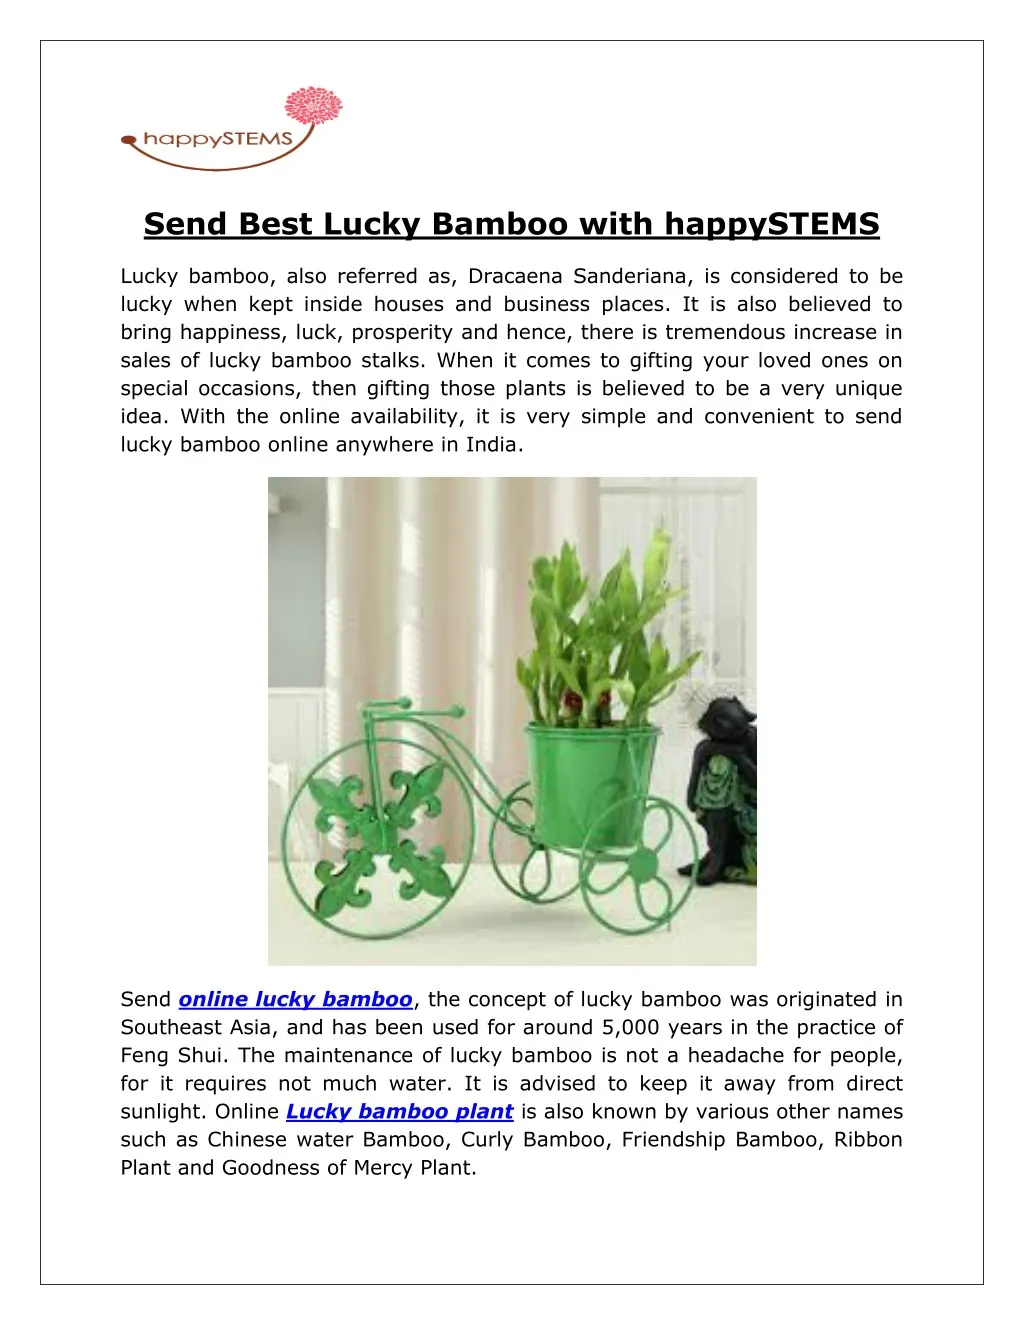 send best lucky bamboo with happystems